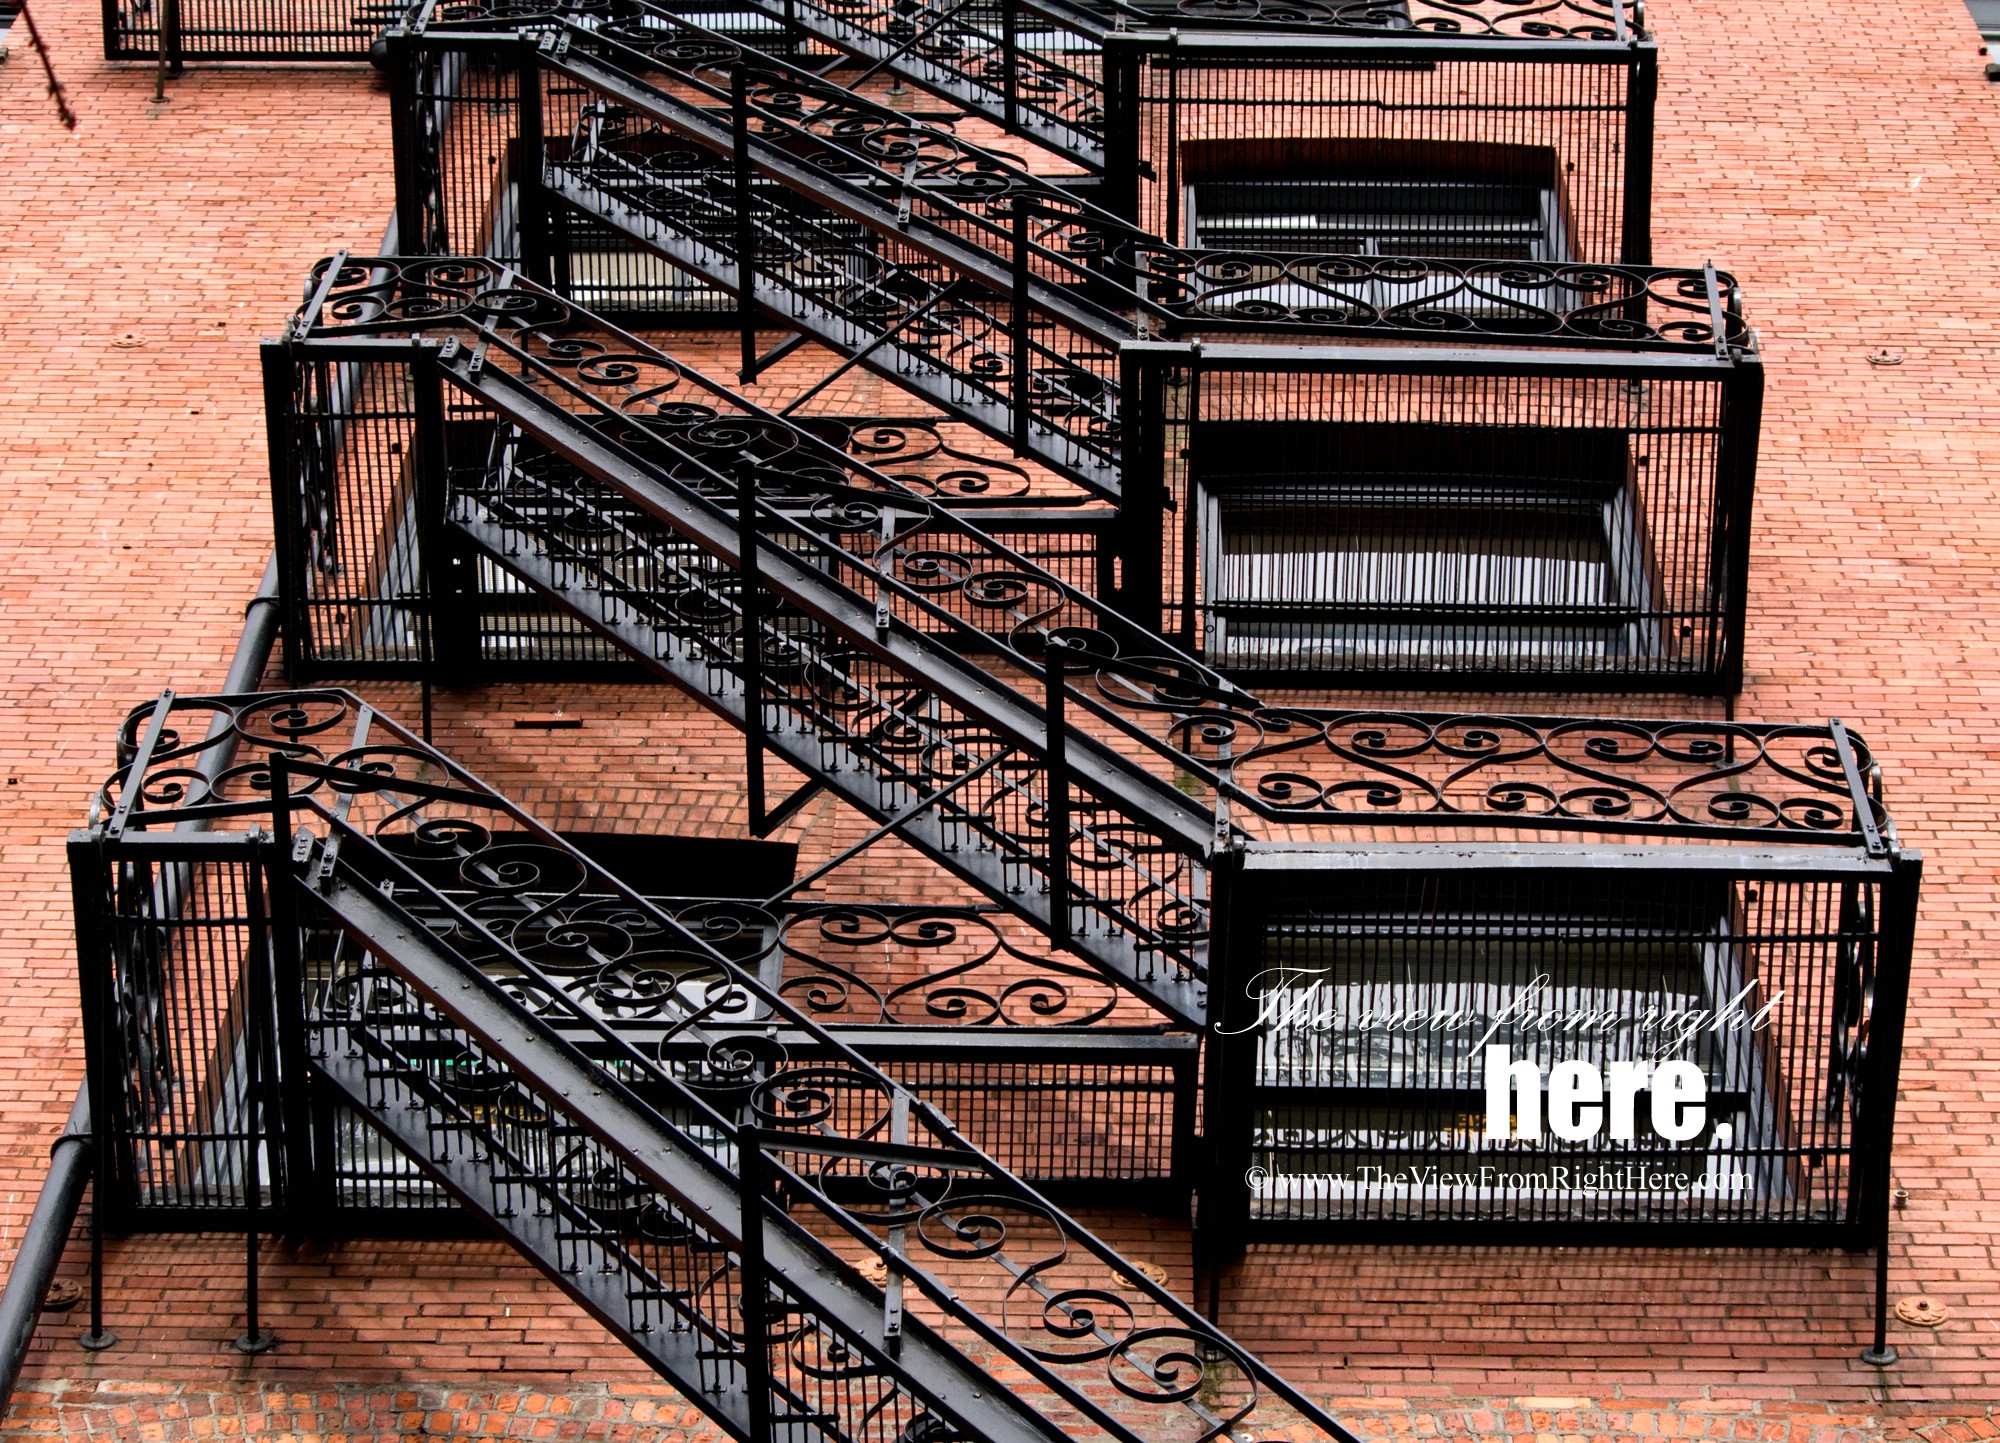 Pioneer Square Fire Escapes – Weekly Top Shot #20